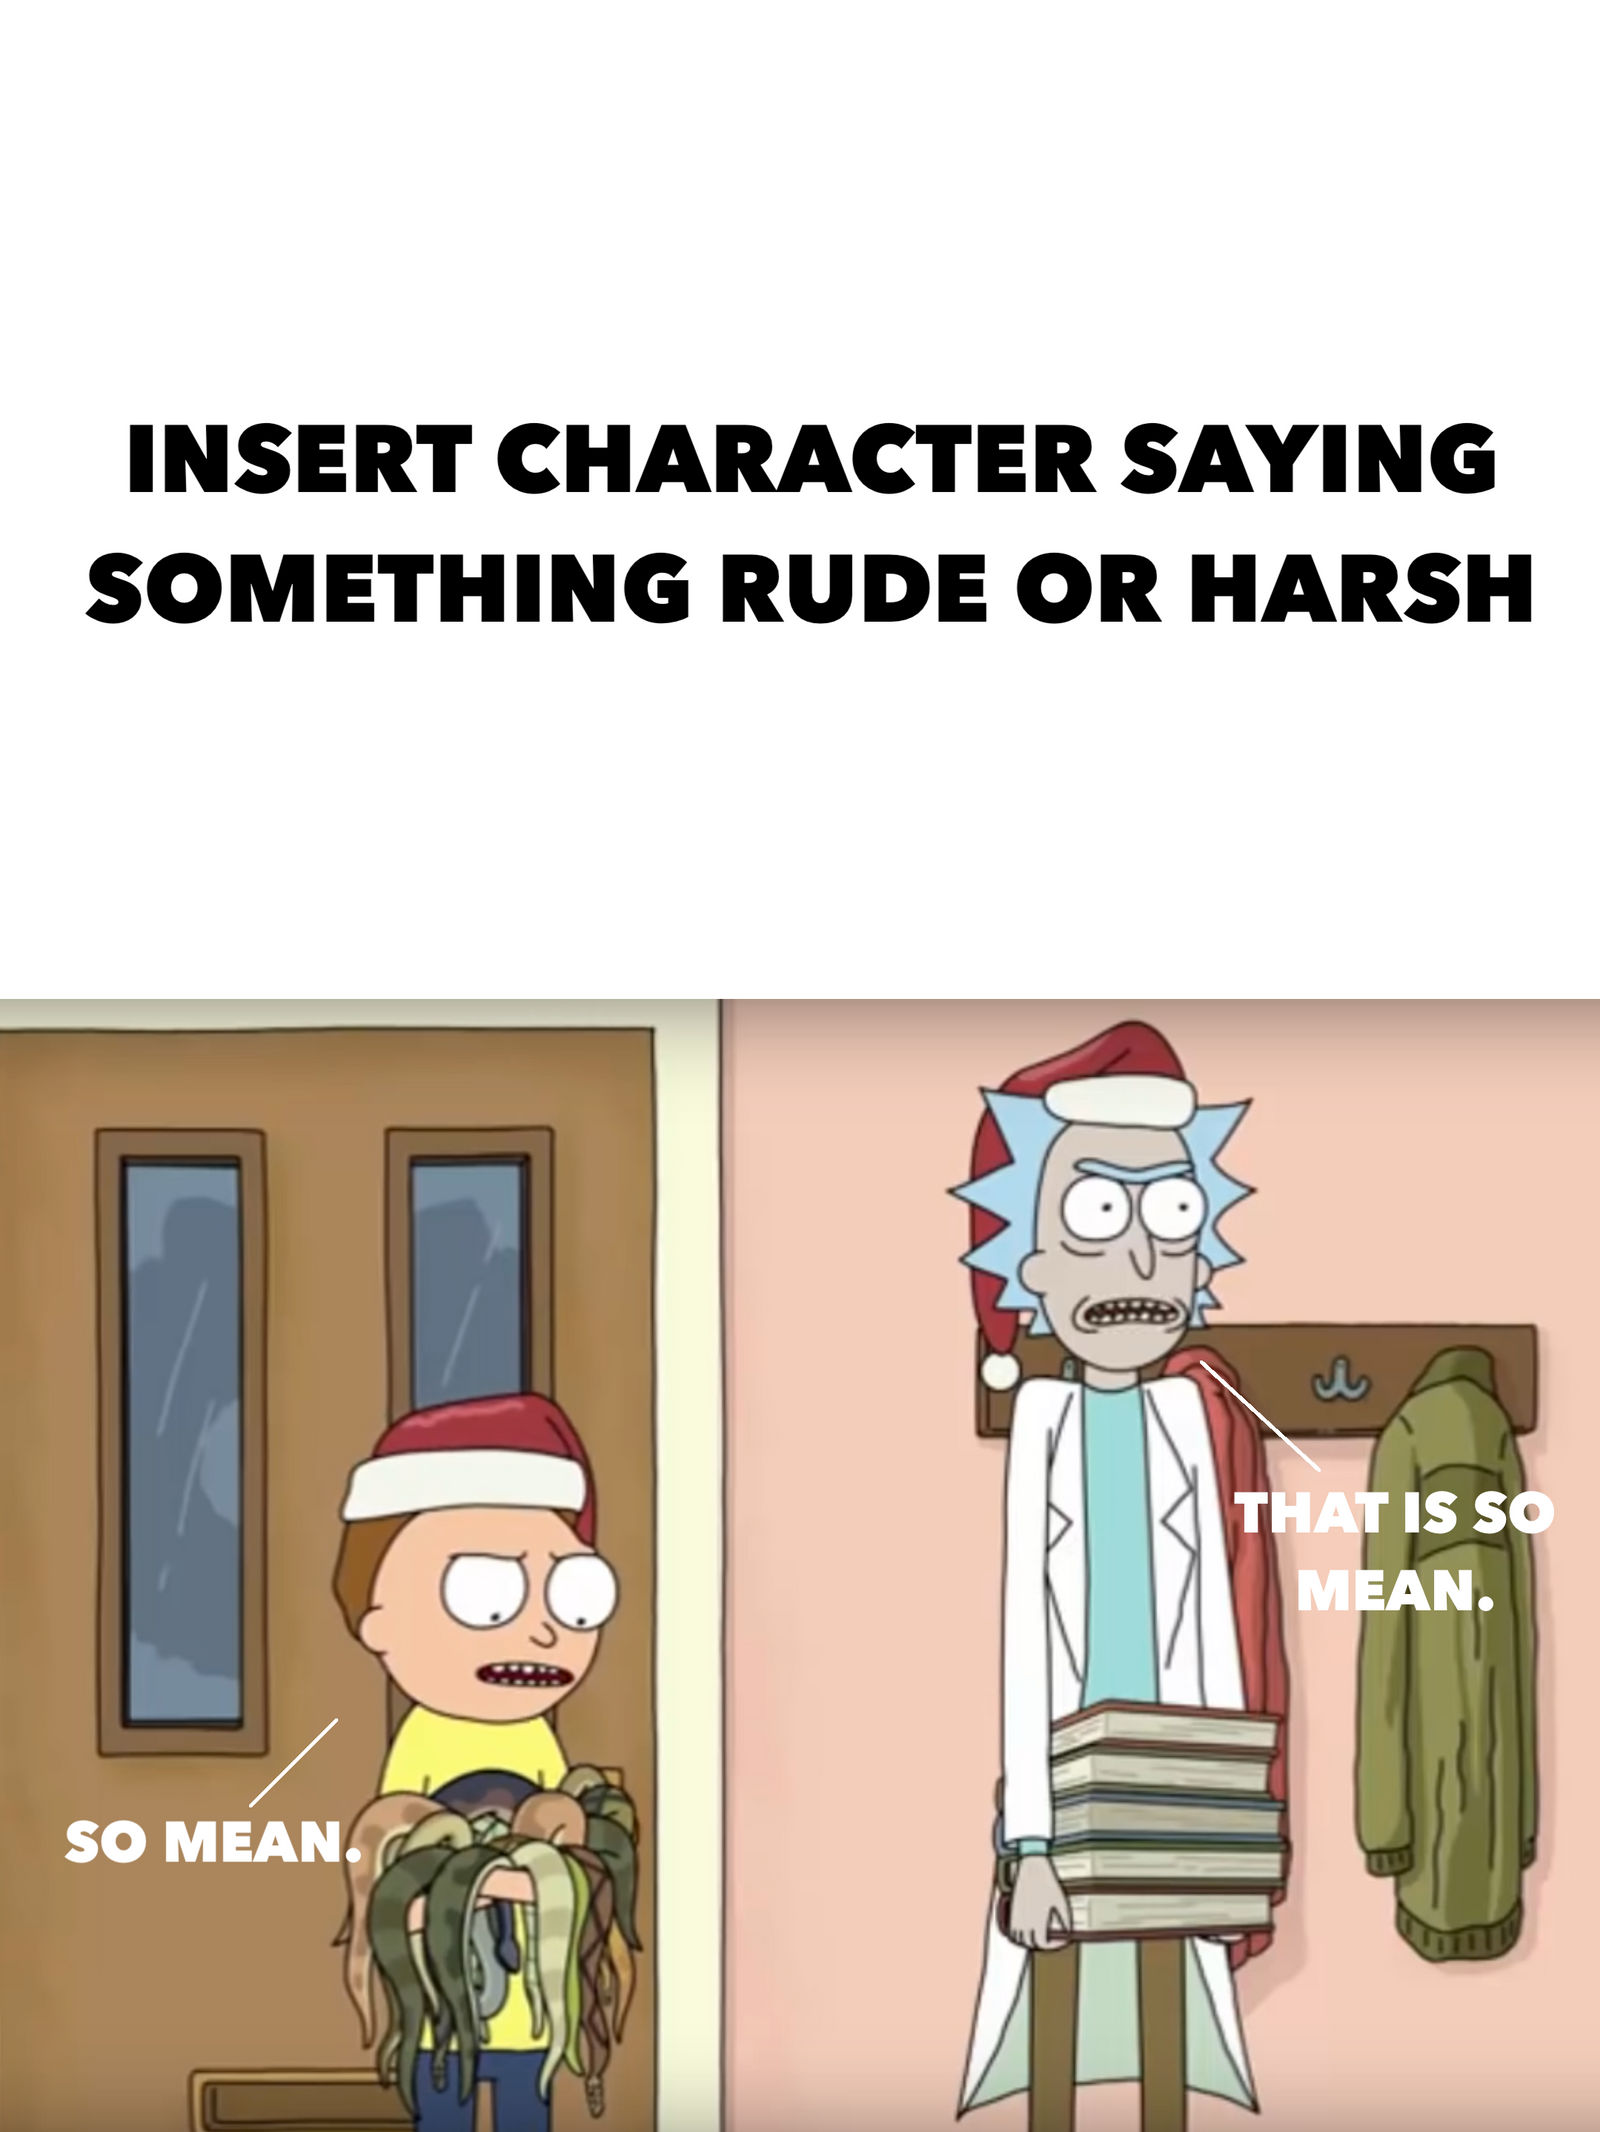 Here's a blank template if anyone wants to make some new memes. :  r/rickandmorty